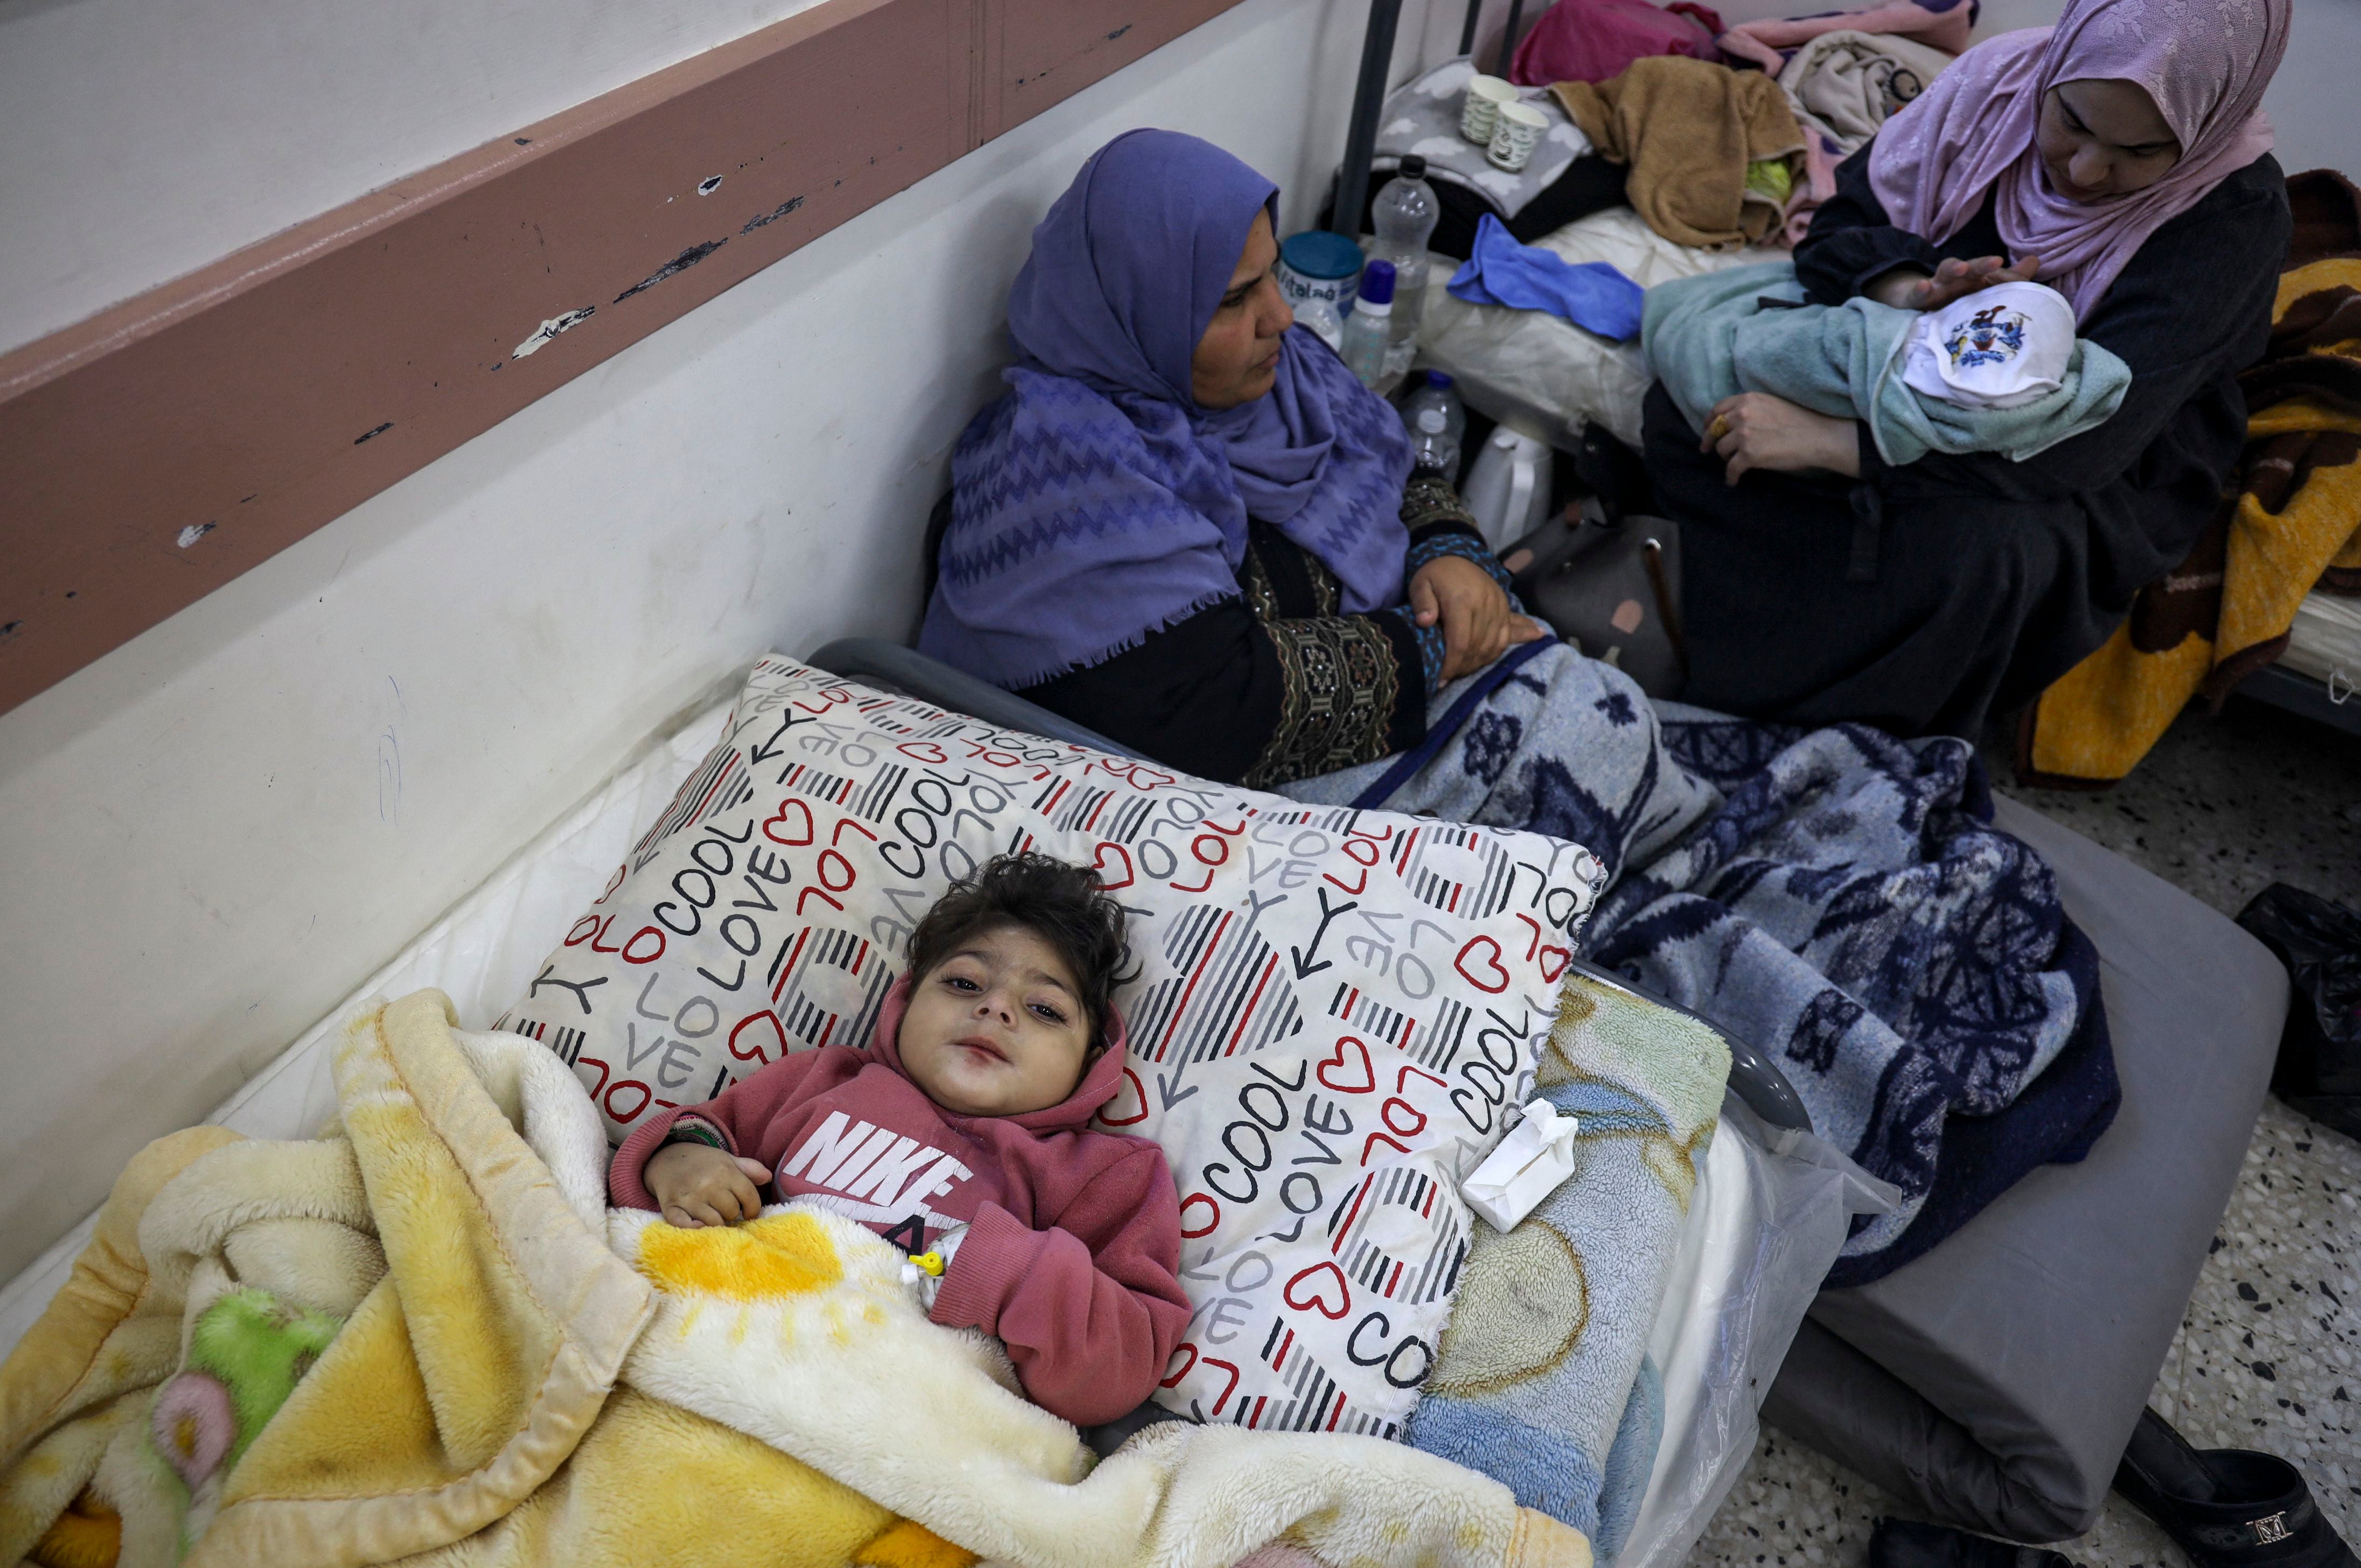 Palestinian women and infants receive medical care at a clinic in Rafah, in the southern Gaza Strip, on Feb. 29.